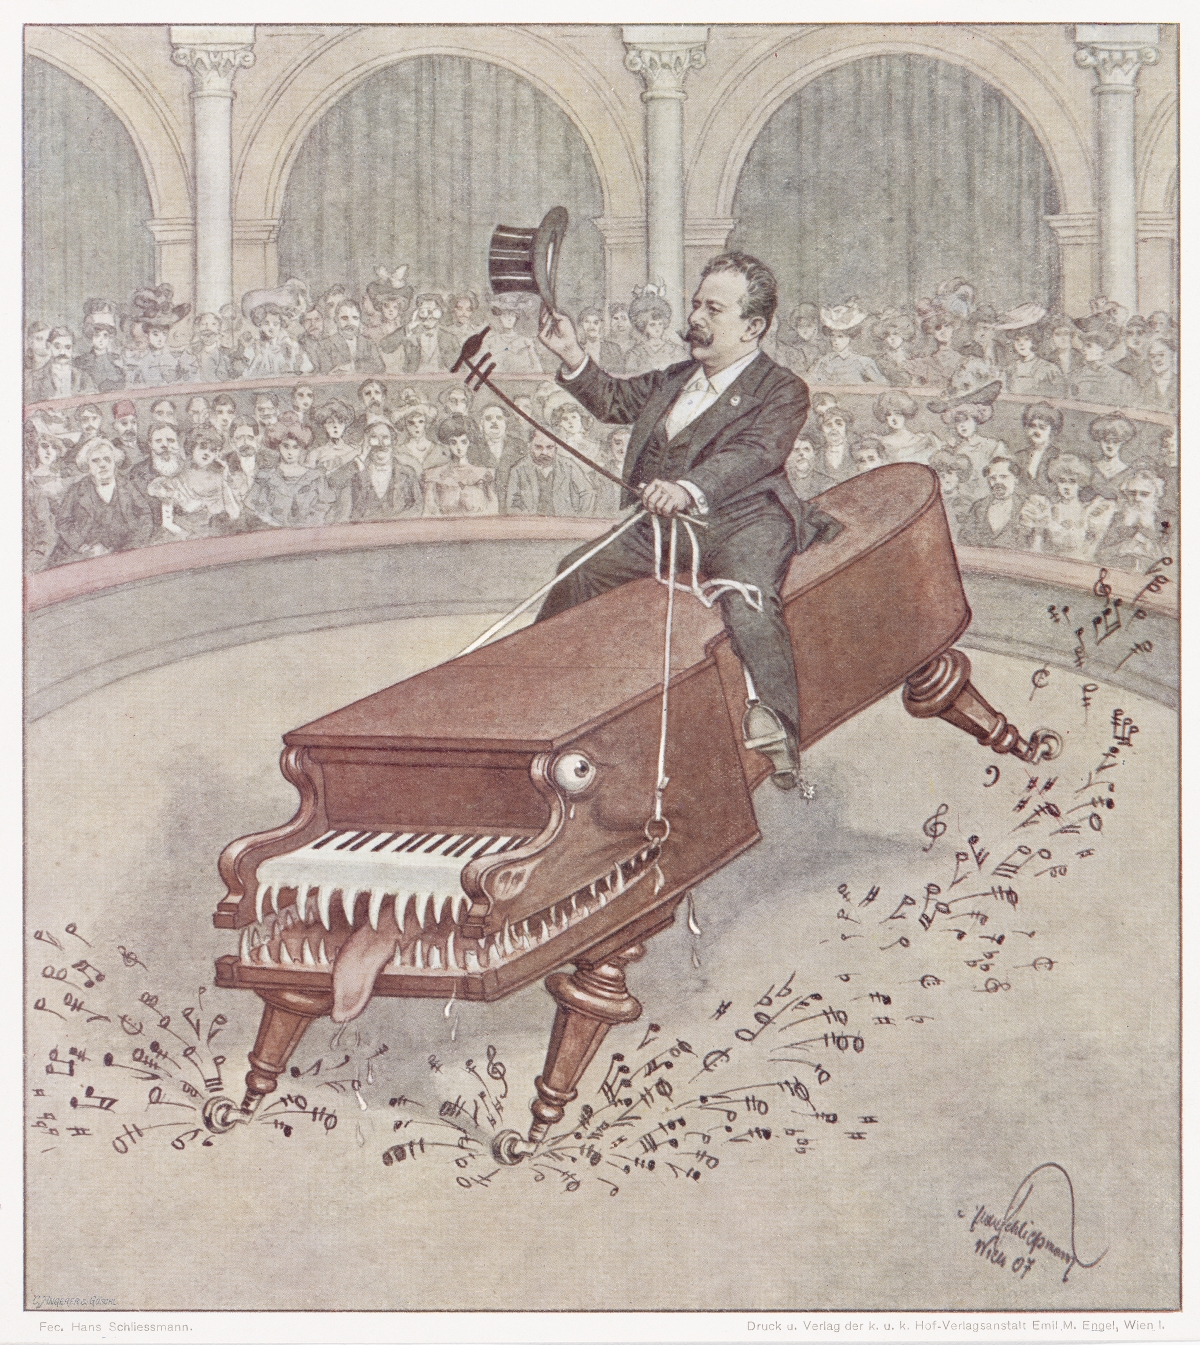 Pianist Alfred Grünfeld - caricature ride on the "thoroughbred Bösendorfer Imperial